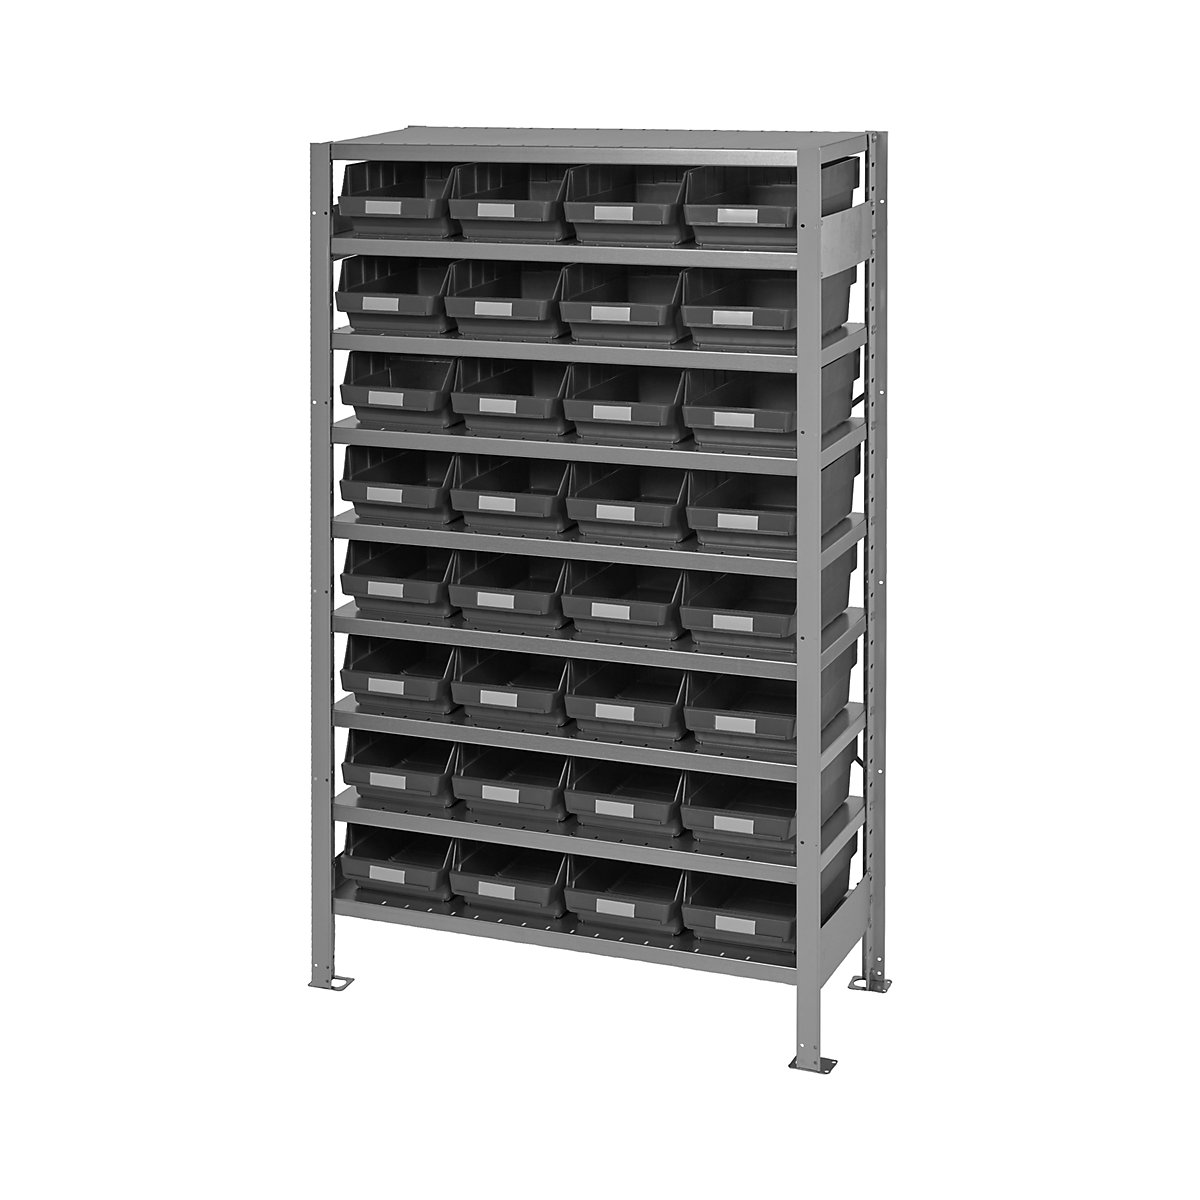 STEMO – Boltless shelving unit, with ESD open fronted storage bins, HxWxD 1790 x 1000 x 400 mm, 32 open fronted storage bins